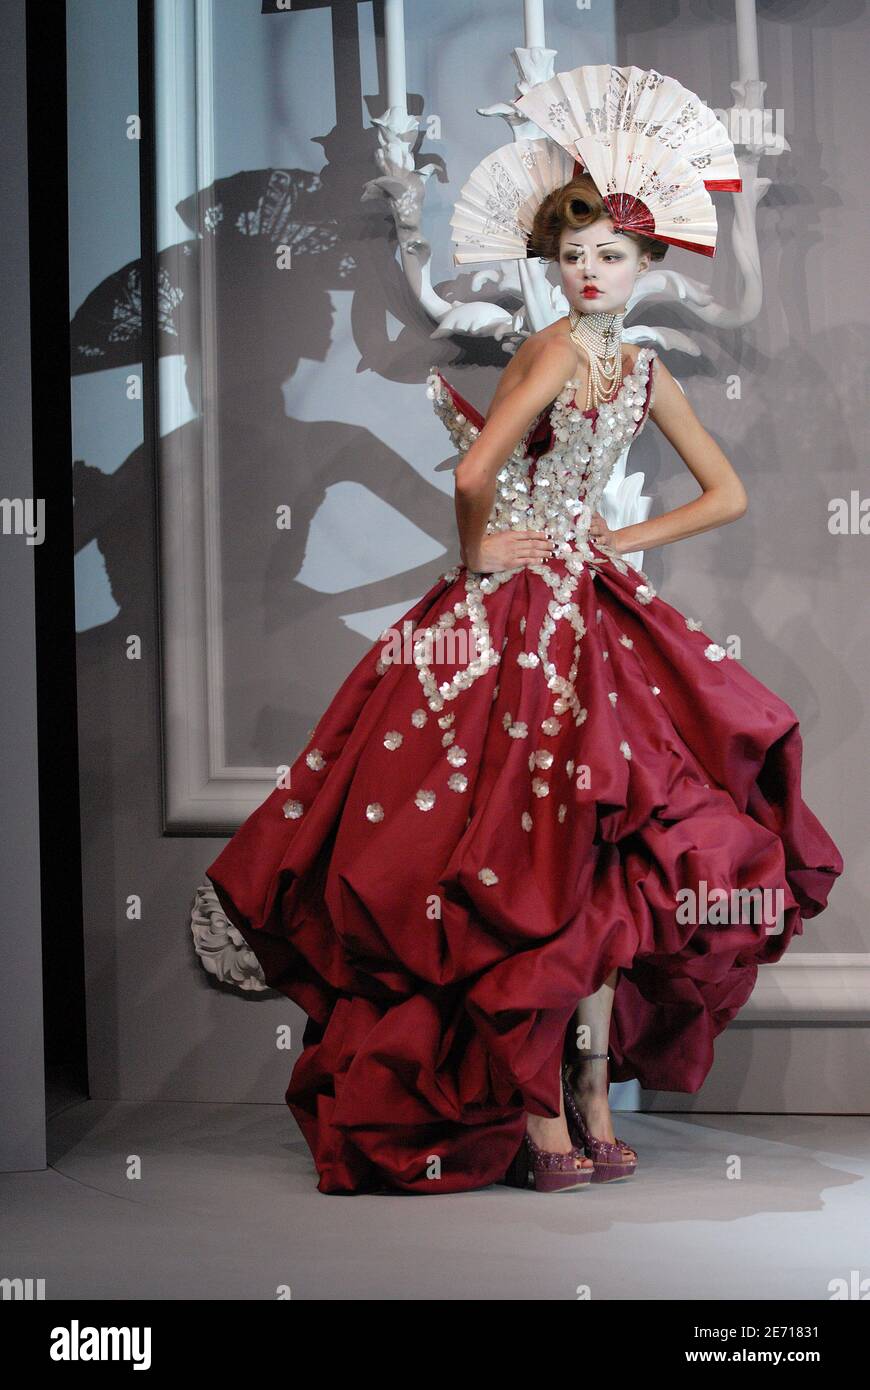 A model displays a creation by fashion designer John Galliano for Christian Dior  Haute-Couture Spring-Summer 2007 collection presentation held at the 'Polo  de Paris' in Paris, France, on January 22, 2007. Photo